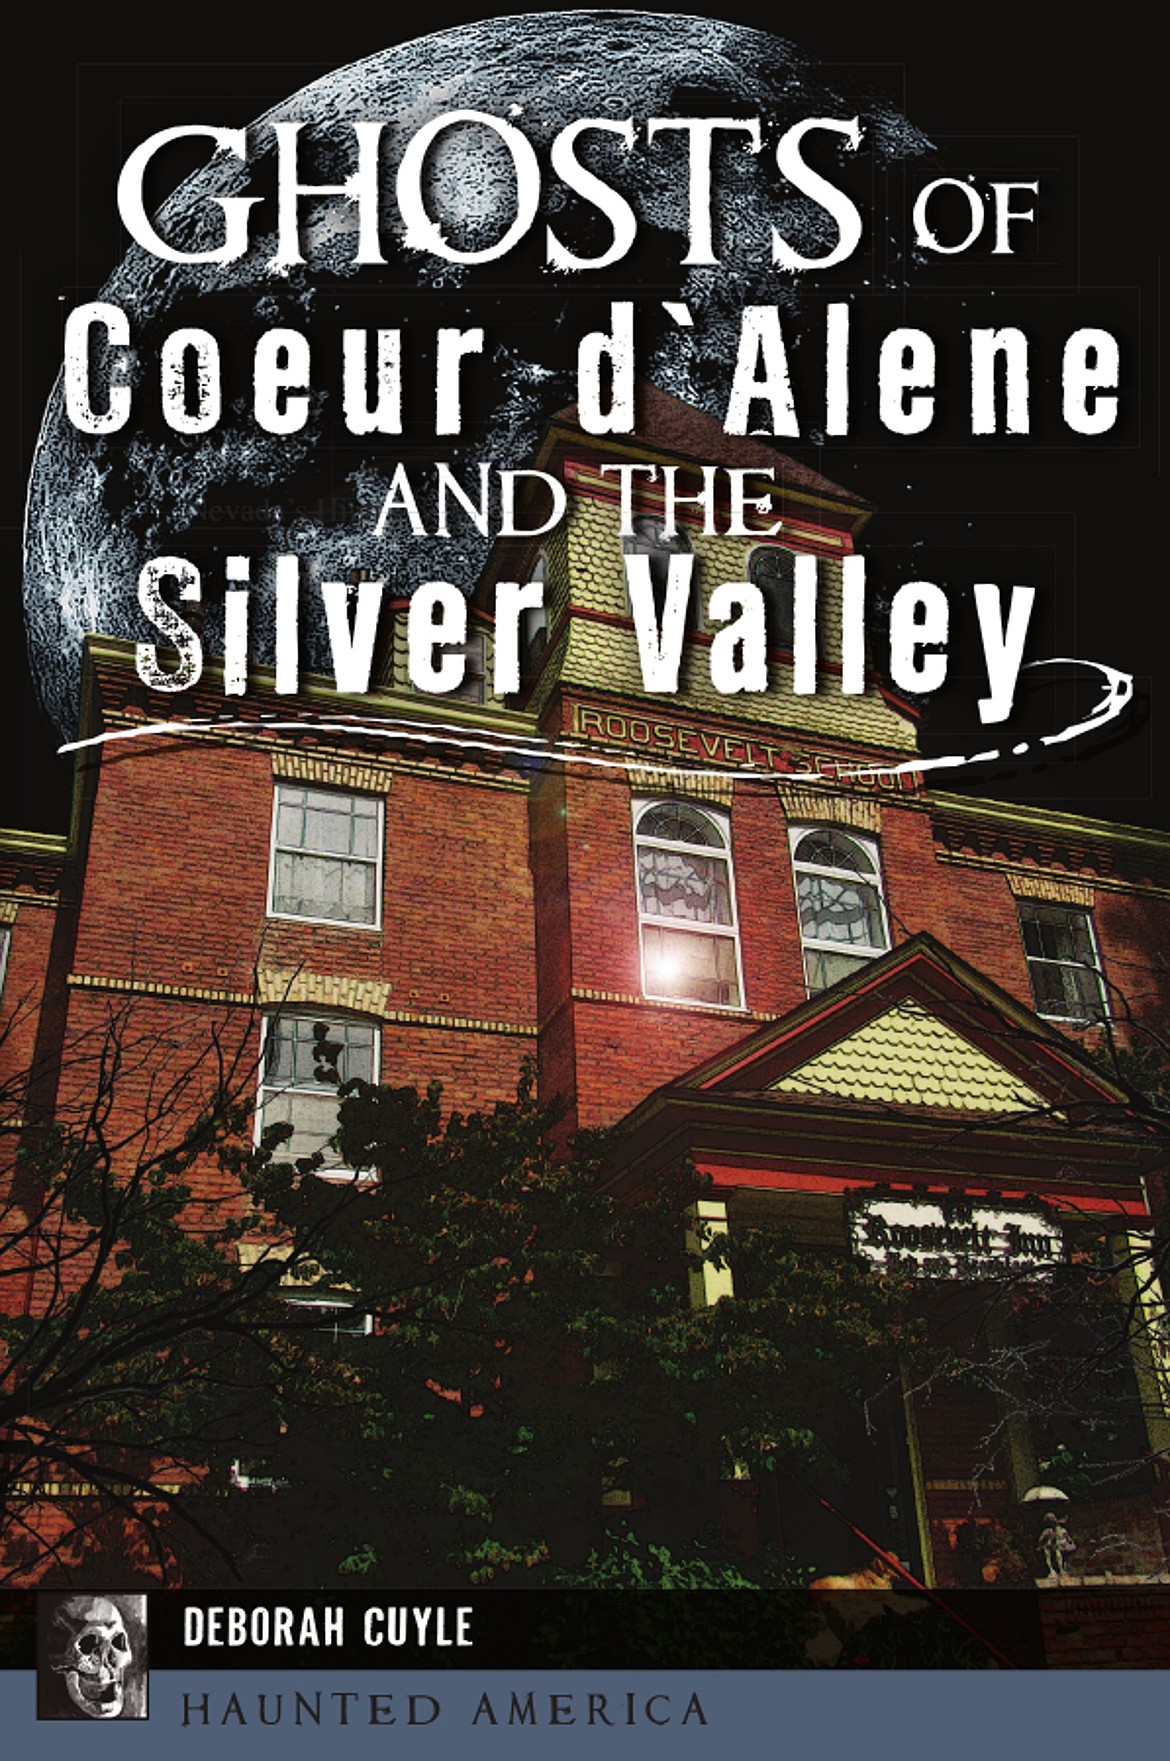 Wallace author Deborah Cuyle released "Ghosts of Coeur d'Alene and the Silver Valley" in late August. The book explores haunted history of North Idaho at locations including the Roosevelt Inn, Farragut State Park and Fort Sherman.